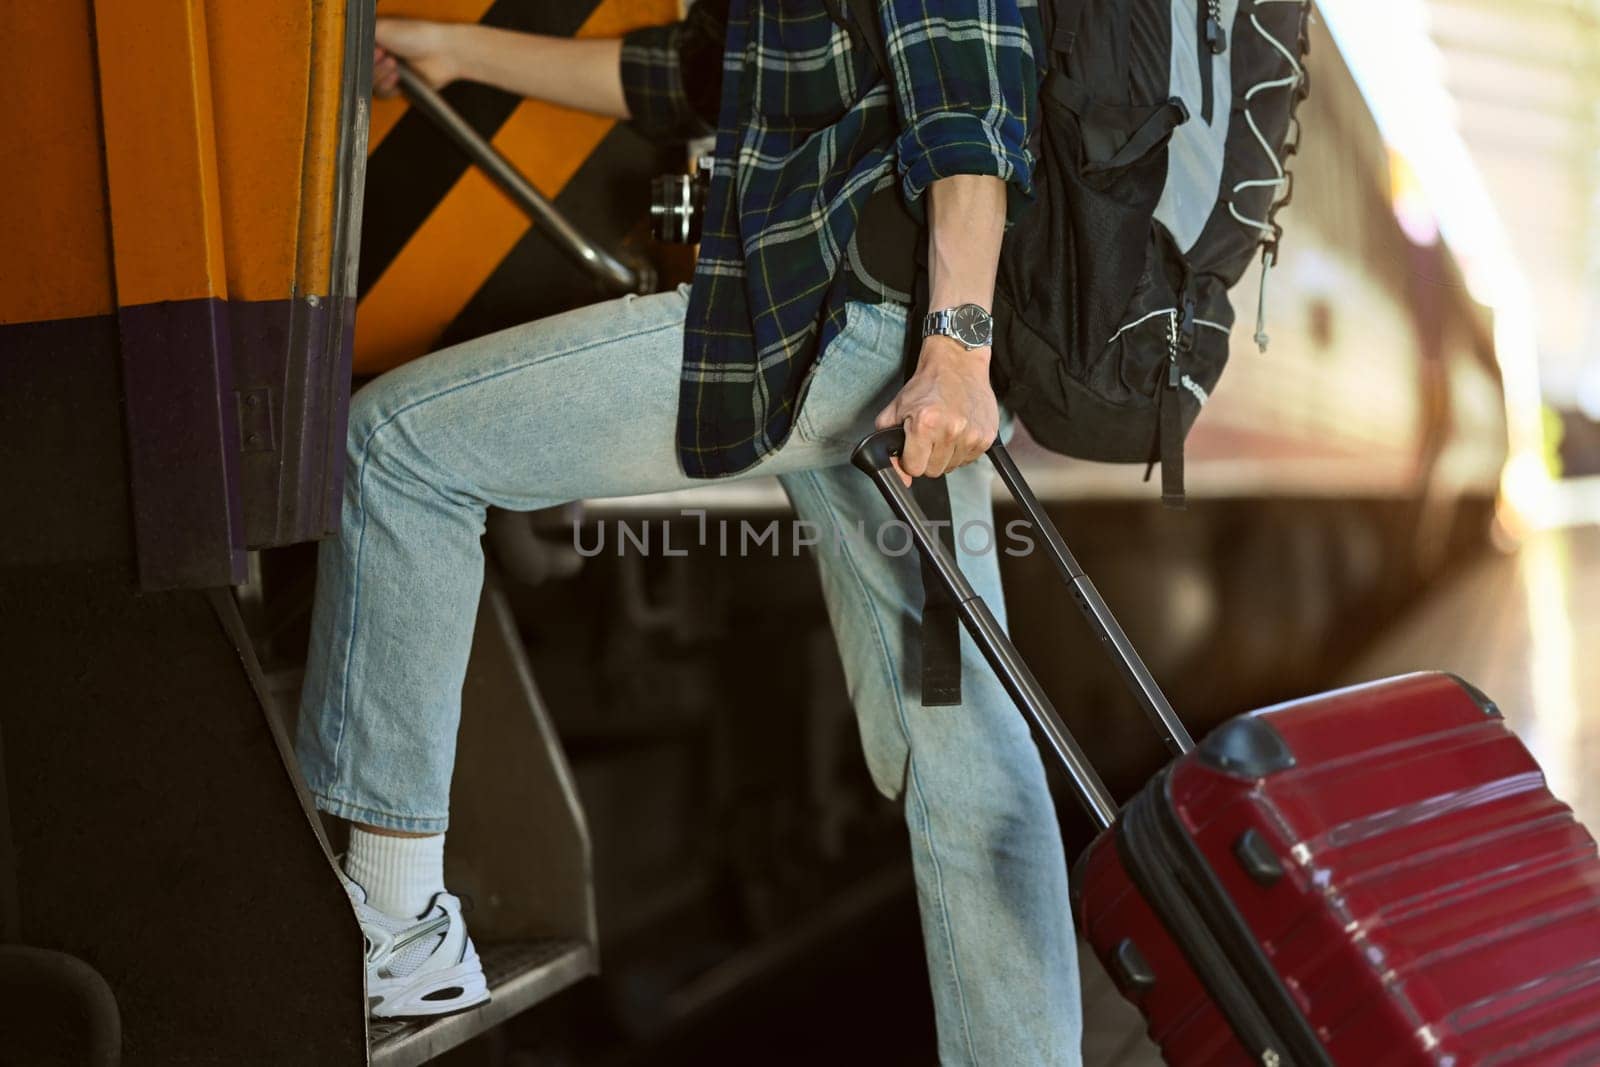 Cropped shot male traveler with suitcase getting on the train. Travel and vacations concept.